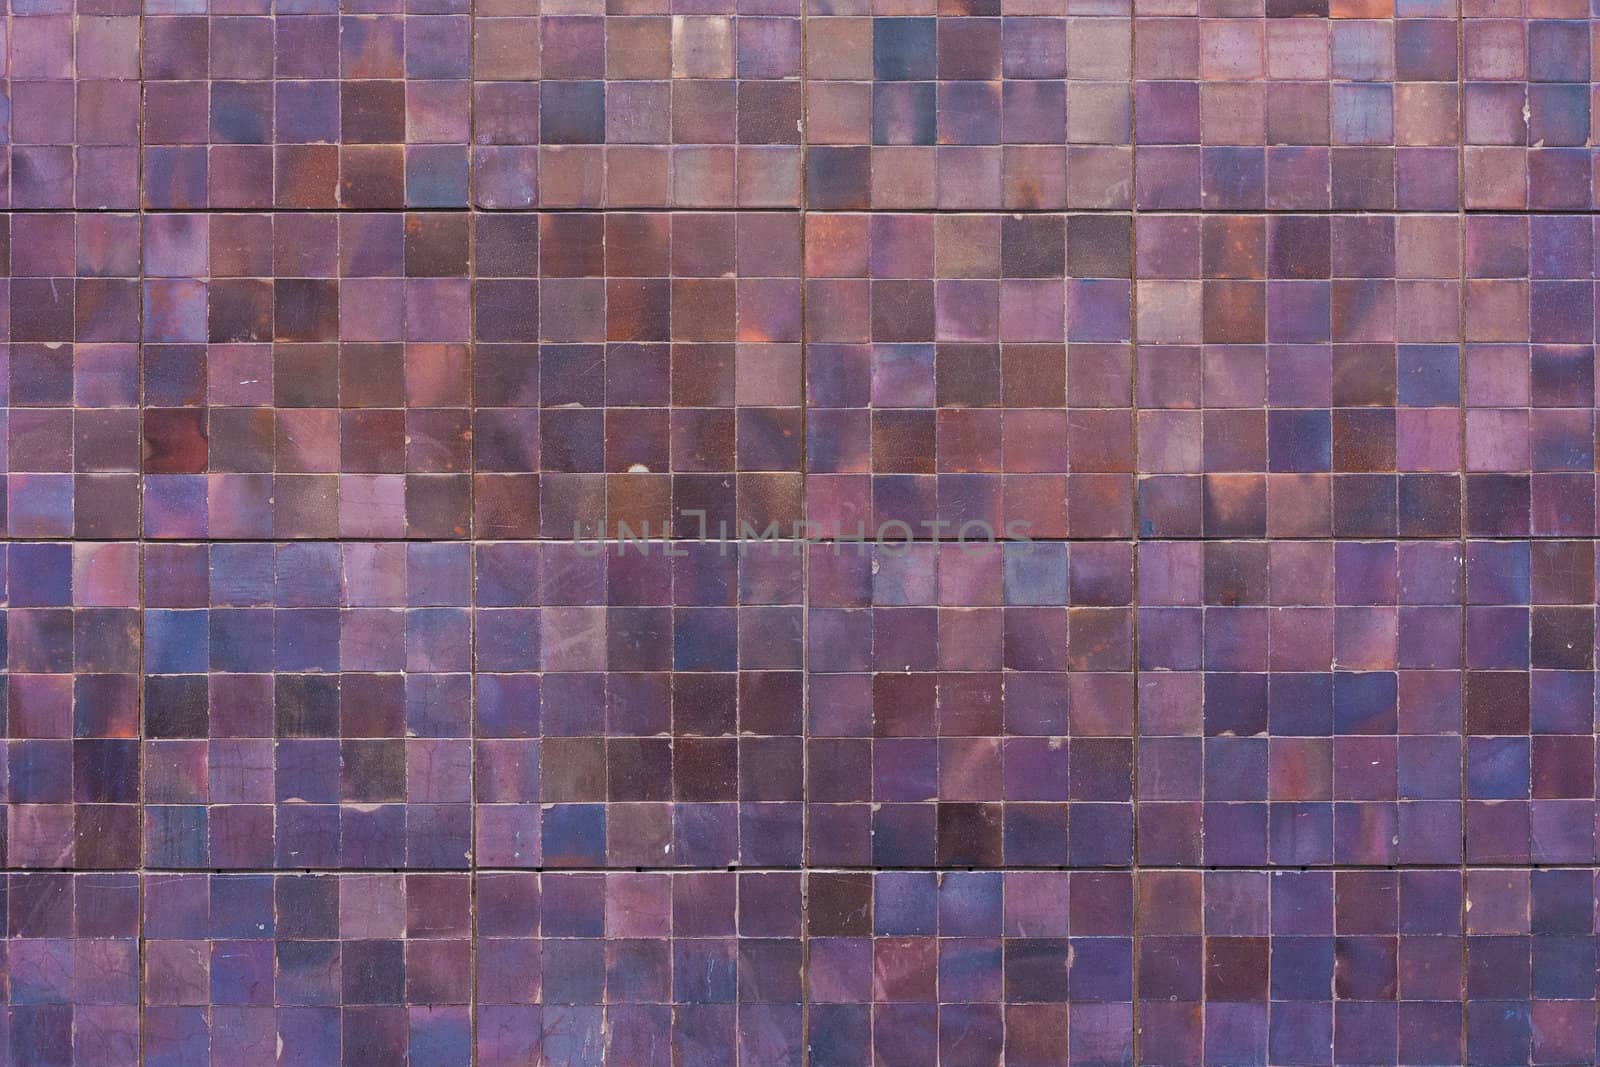 Mosaic background photo of a building wall.